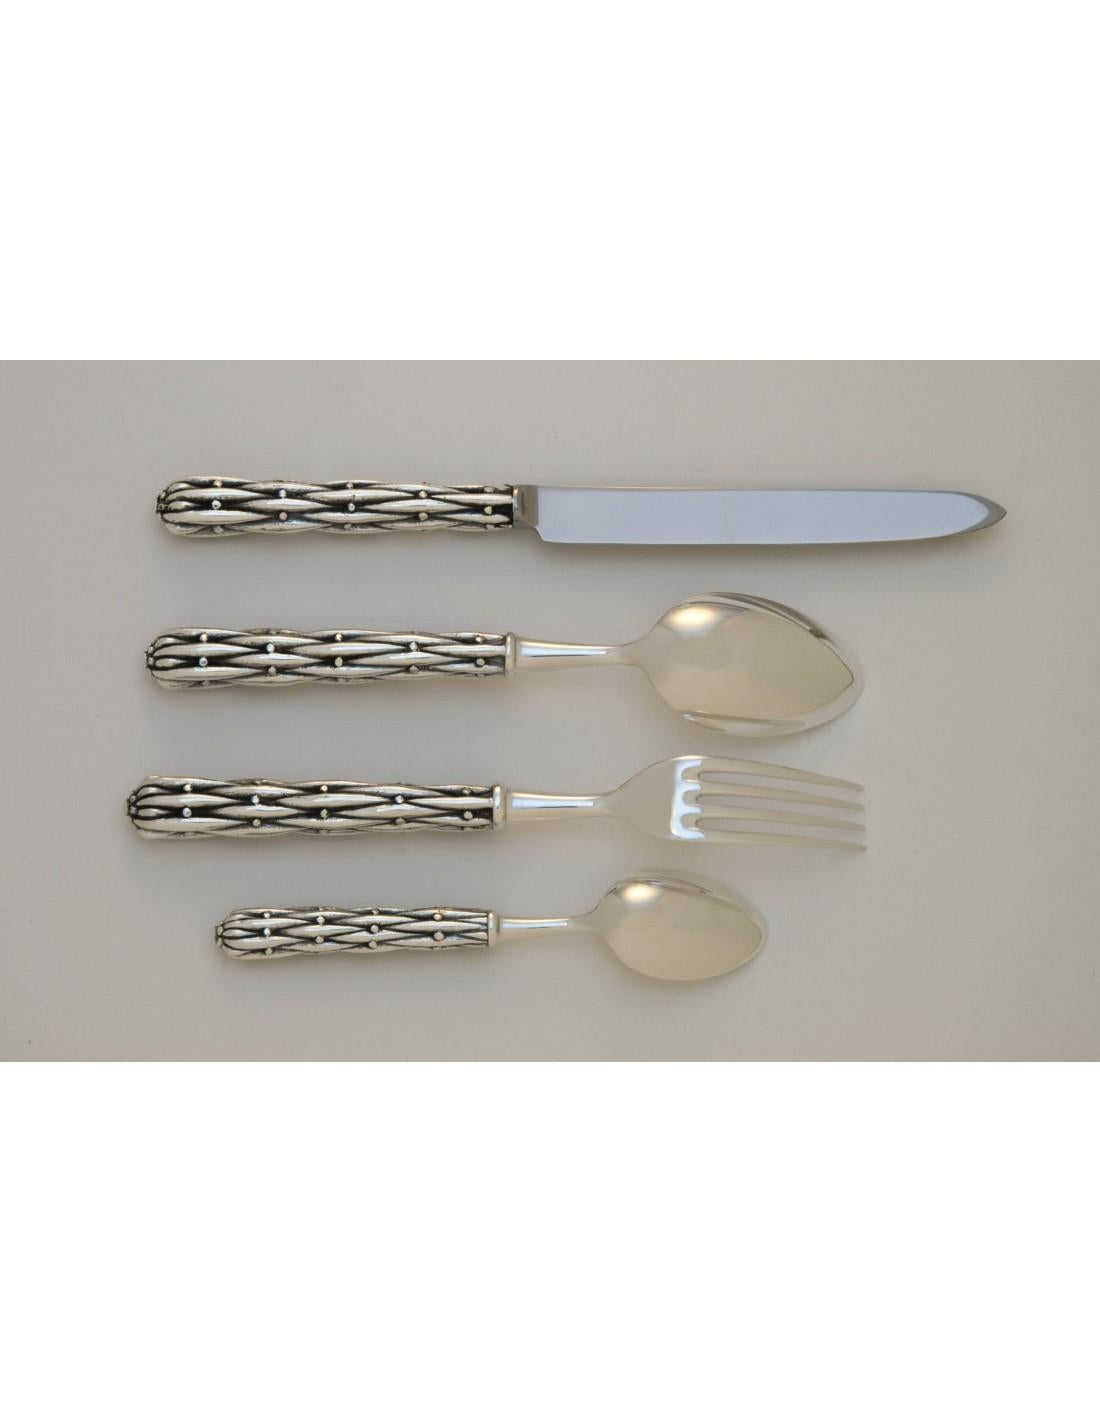 Set of 4 pieces in silver bronze or gold bronze

Set of 4 pieces (table spoon, table/fish fork, dessert spoon, table knife or meat/fish knife) in silver bronze 35/42 microns

It is possible to order all products separately

Table spoon
Table